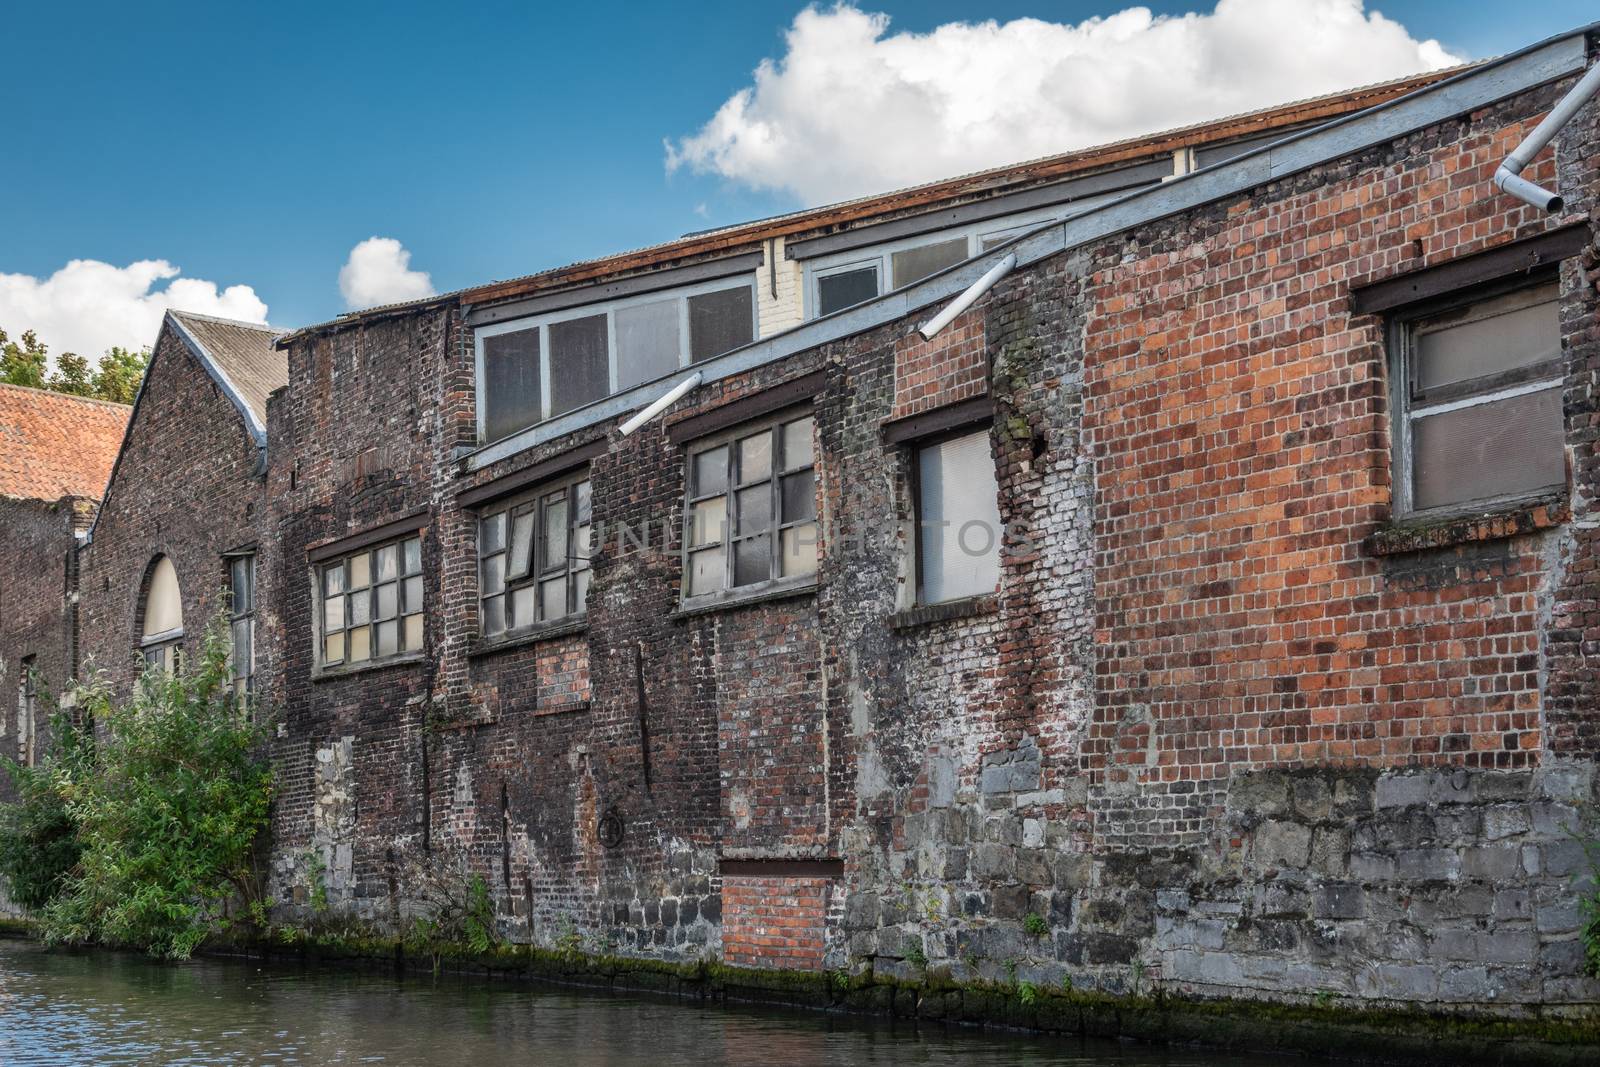 Gent, Flanders, Belgium -  June 21, 2019: Old red-brown brick industrial warehouses along the Lieve River under blue sky with white cloud patches. Greenish water.